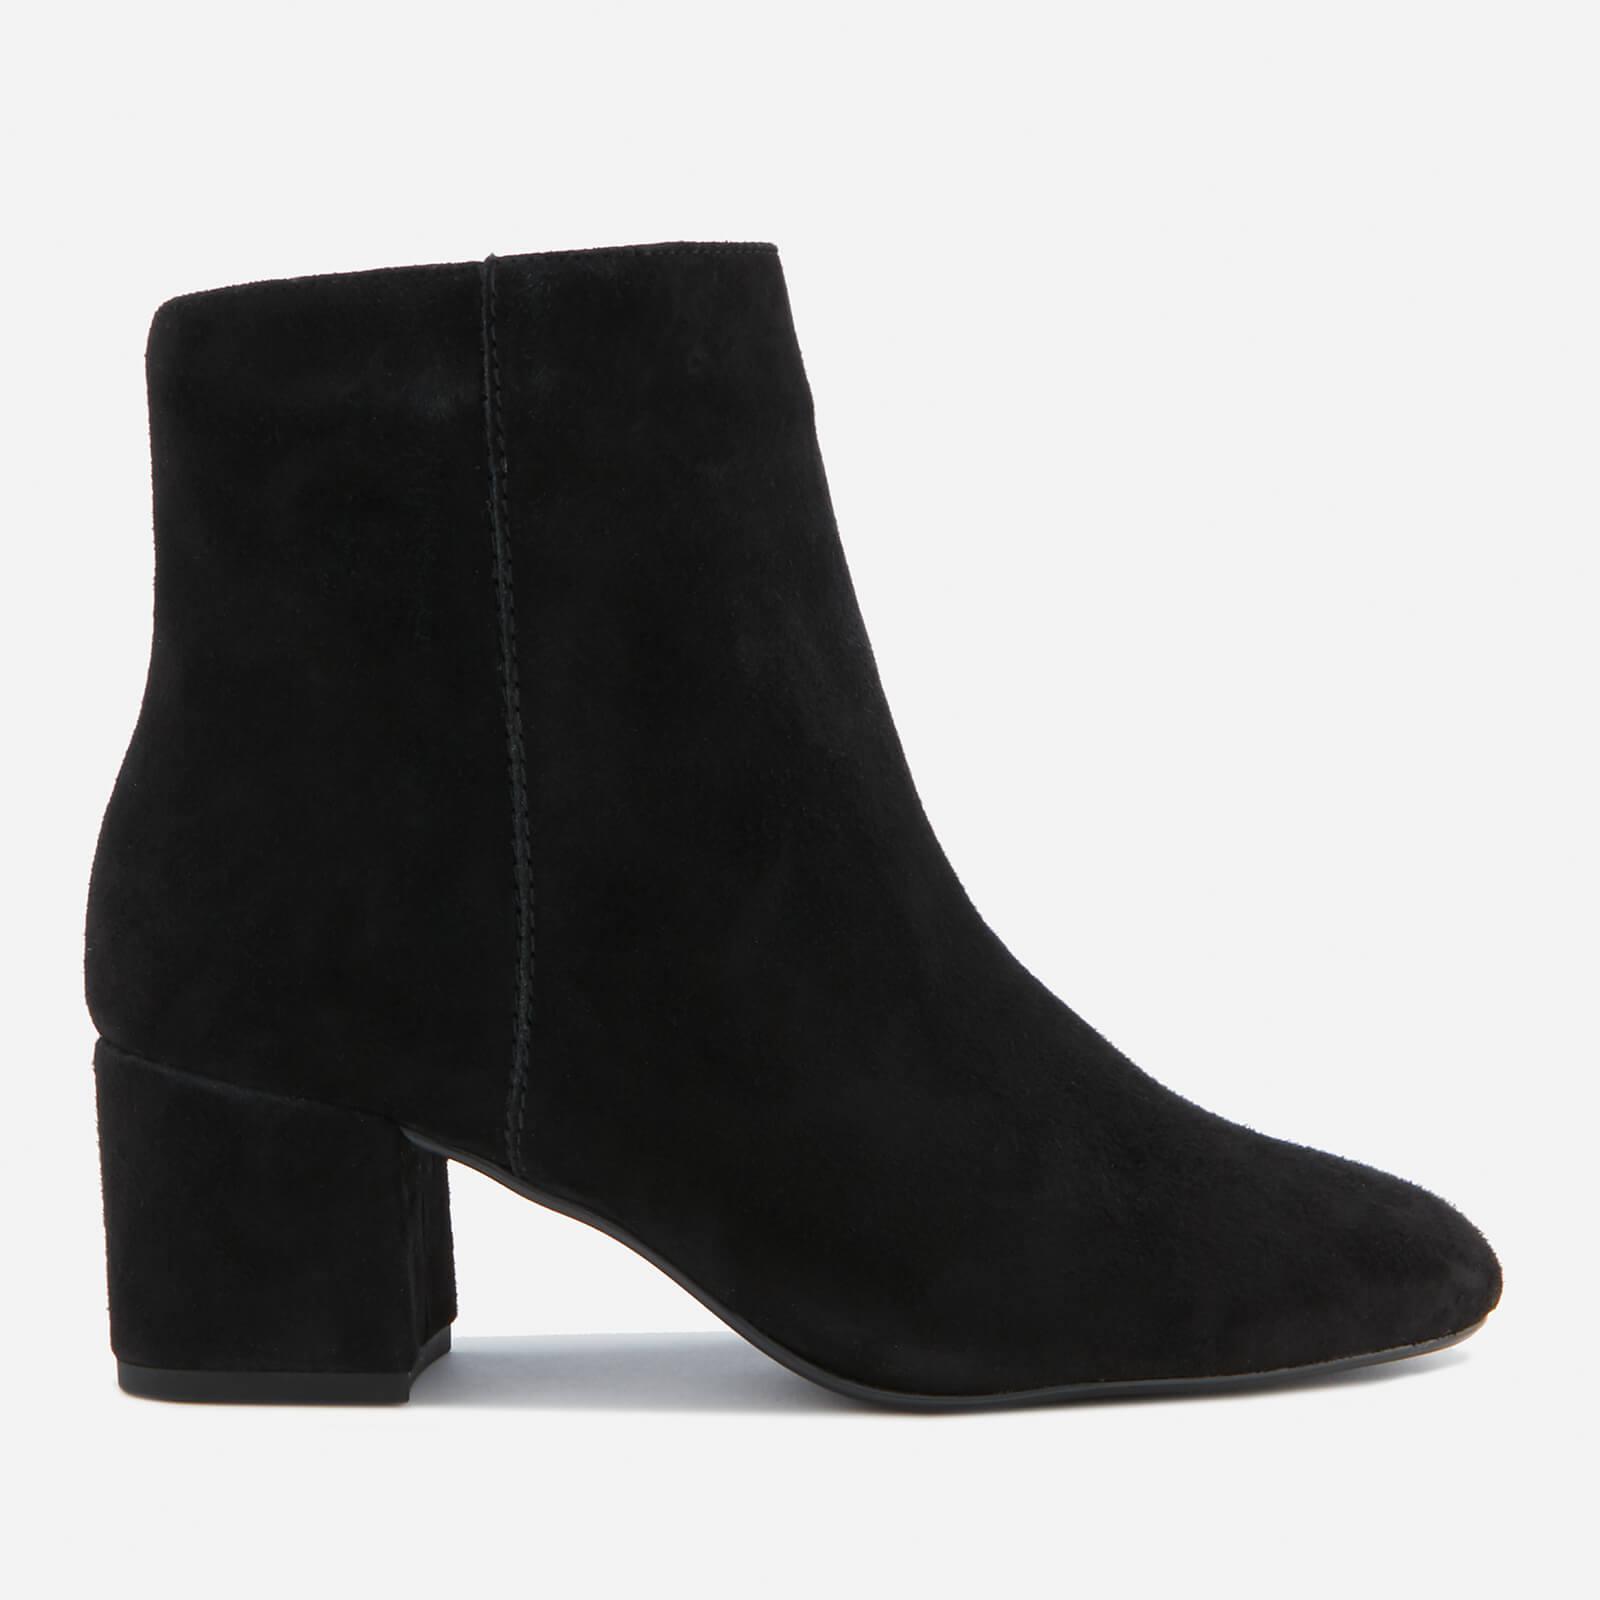 Dune Suede Wide Fit Olyvea Block Heeled Ankle Boots in Black - Lyst